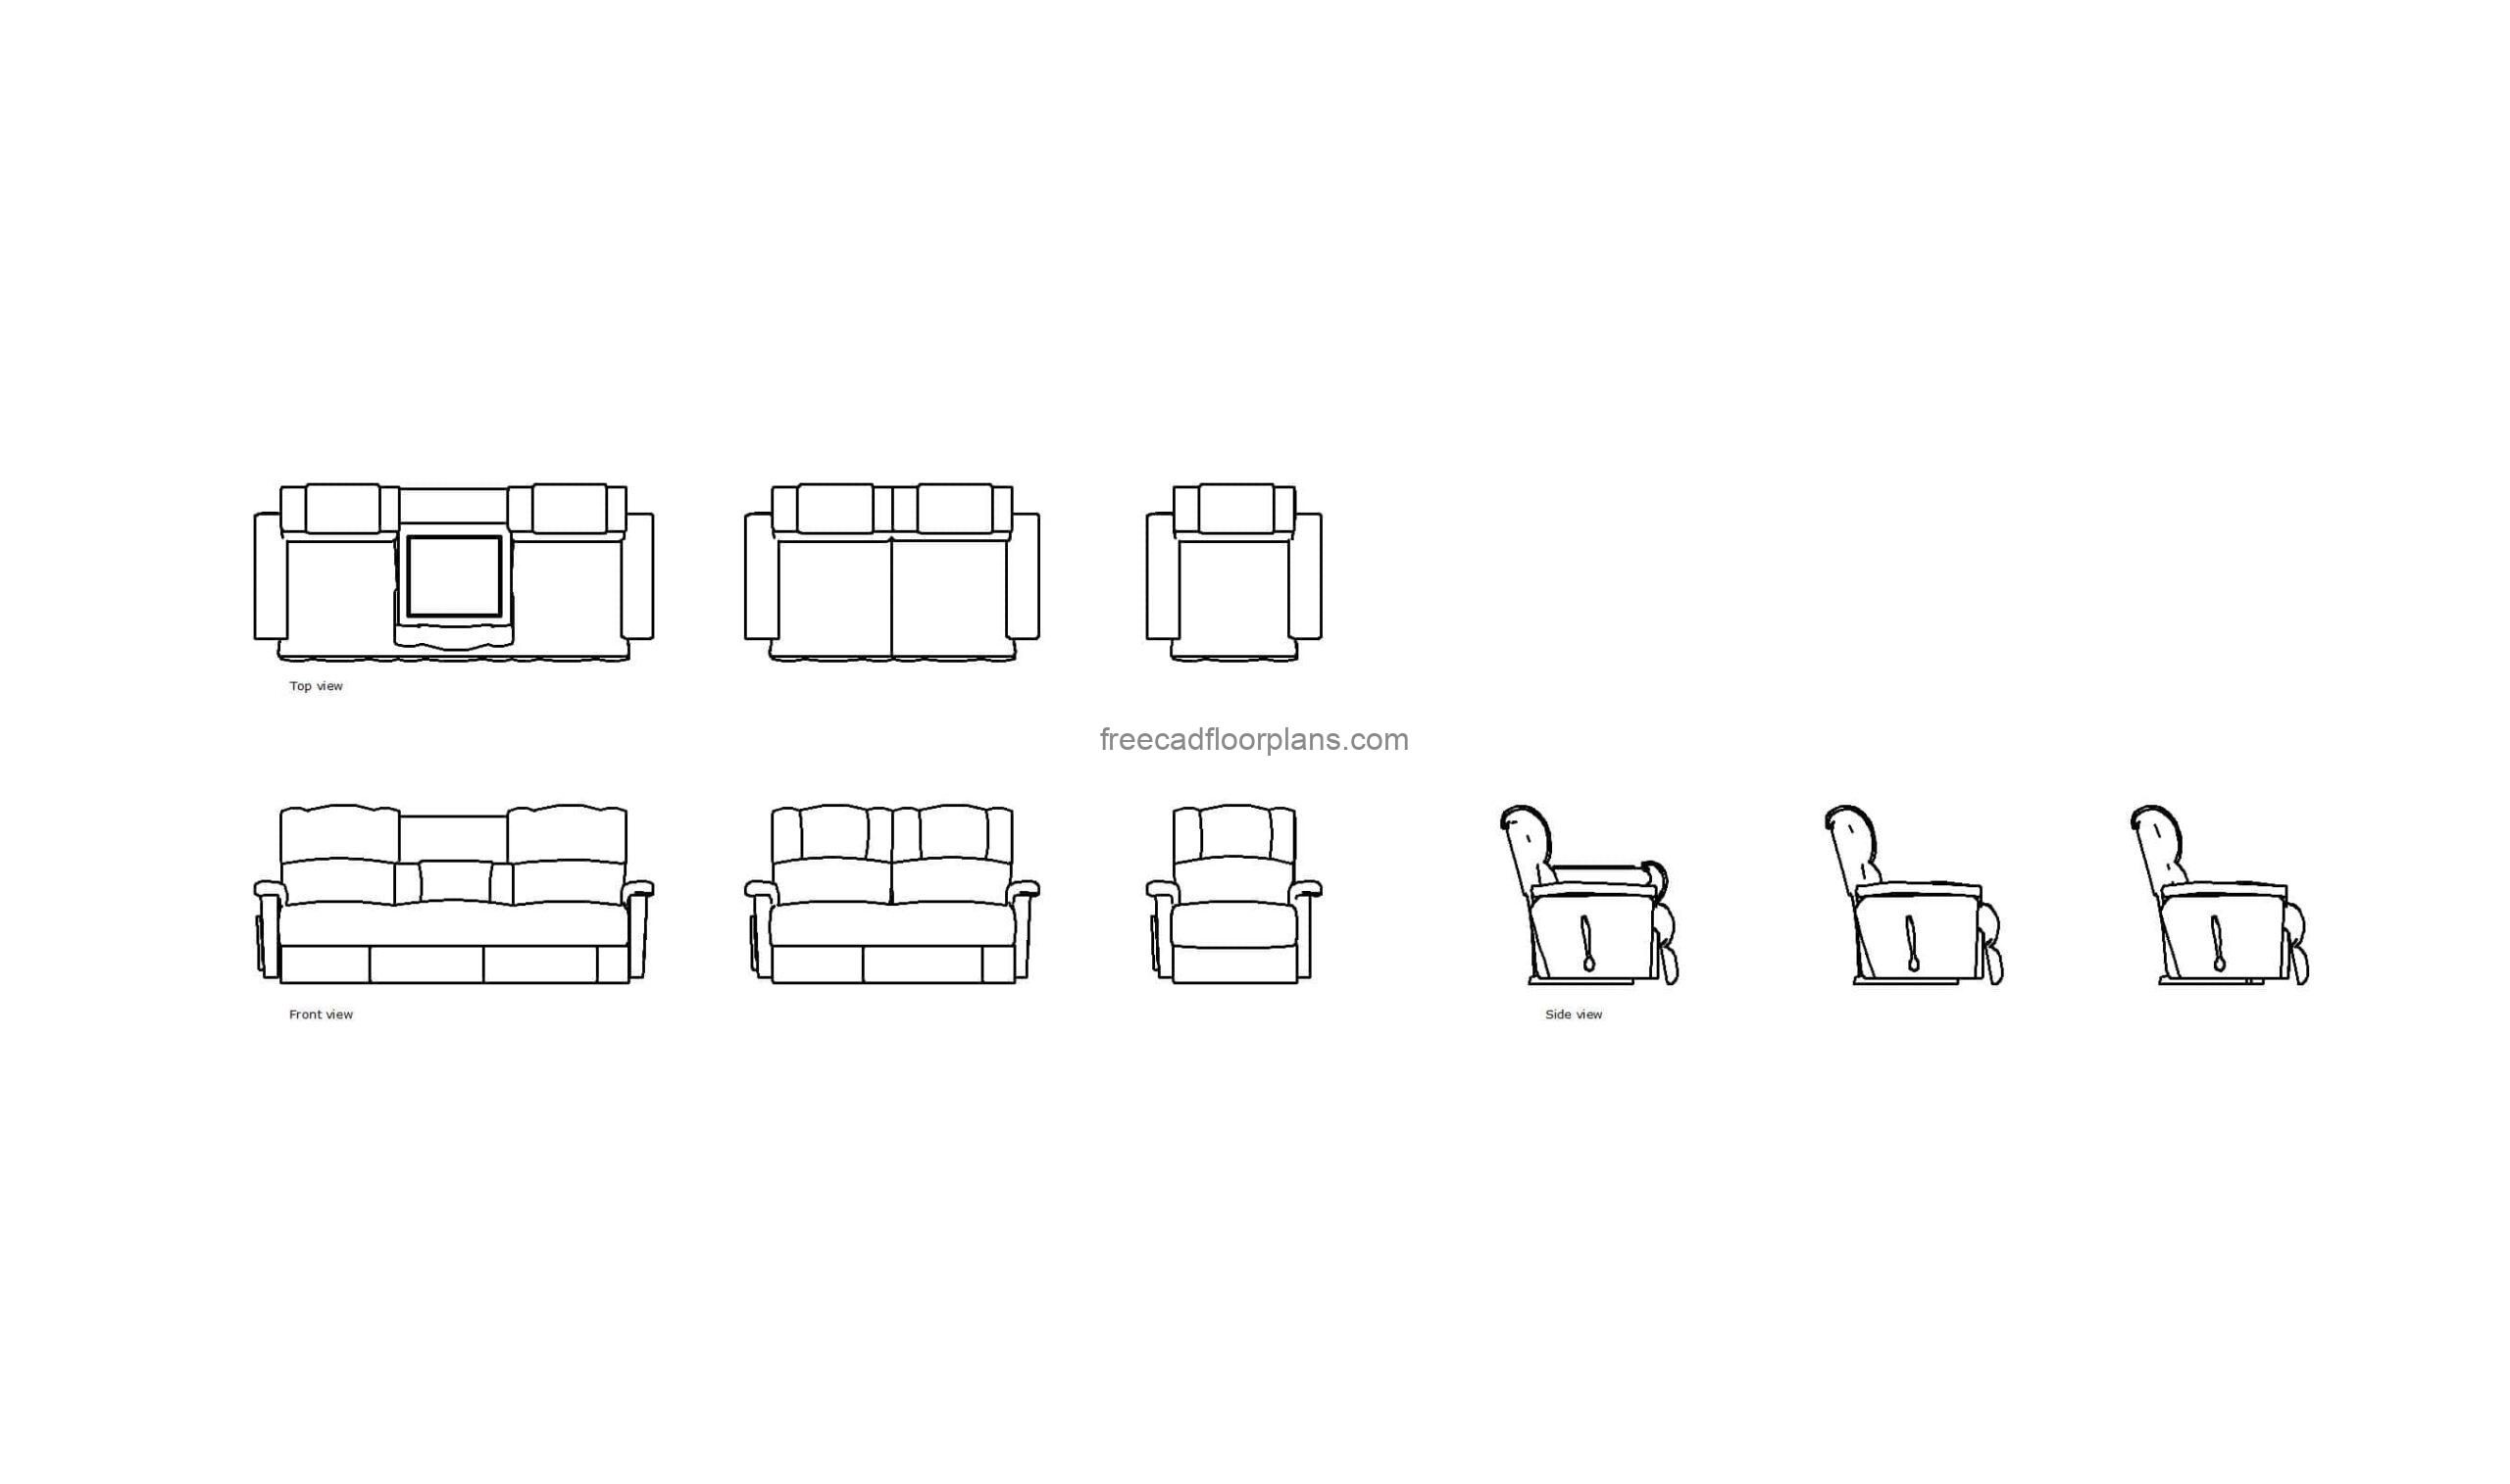 autocad drawing of various lazy boy recliners, plan and elevation 2d views, dwg file free for download